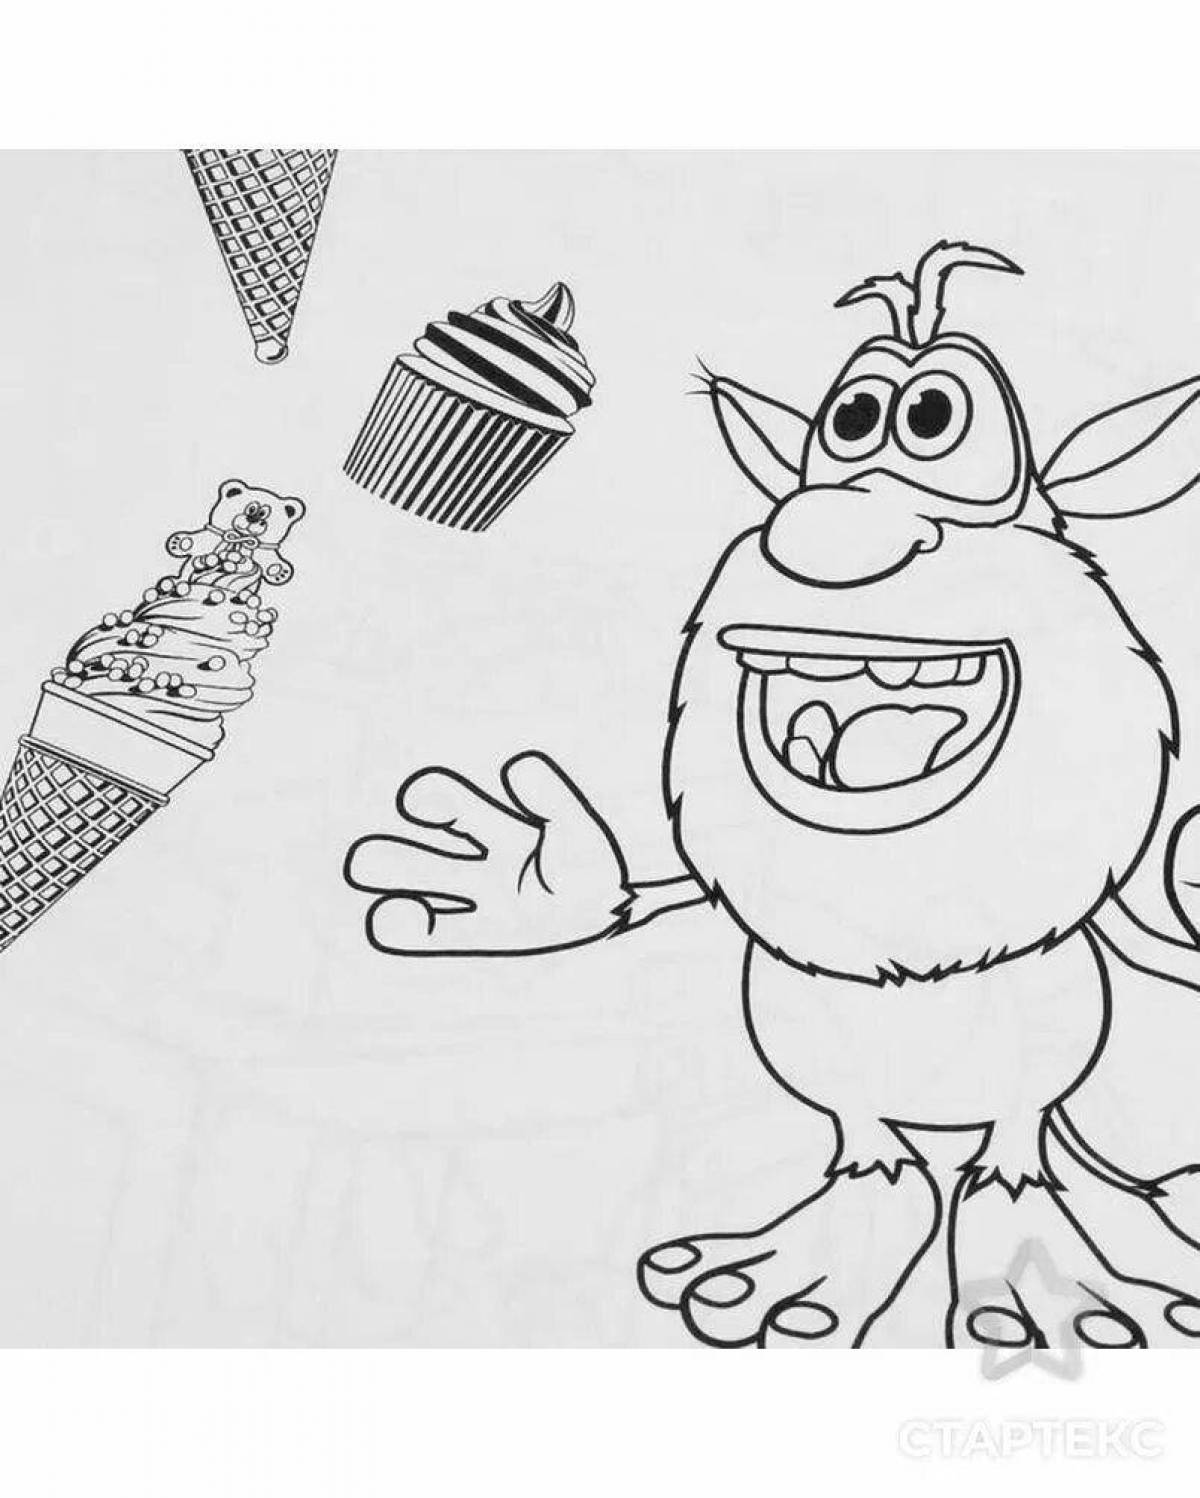 Hubba bubba animated coloring page